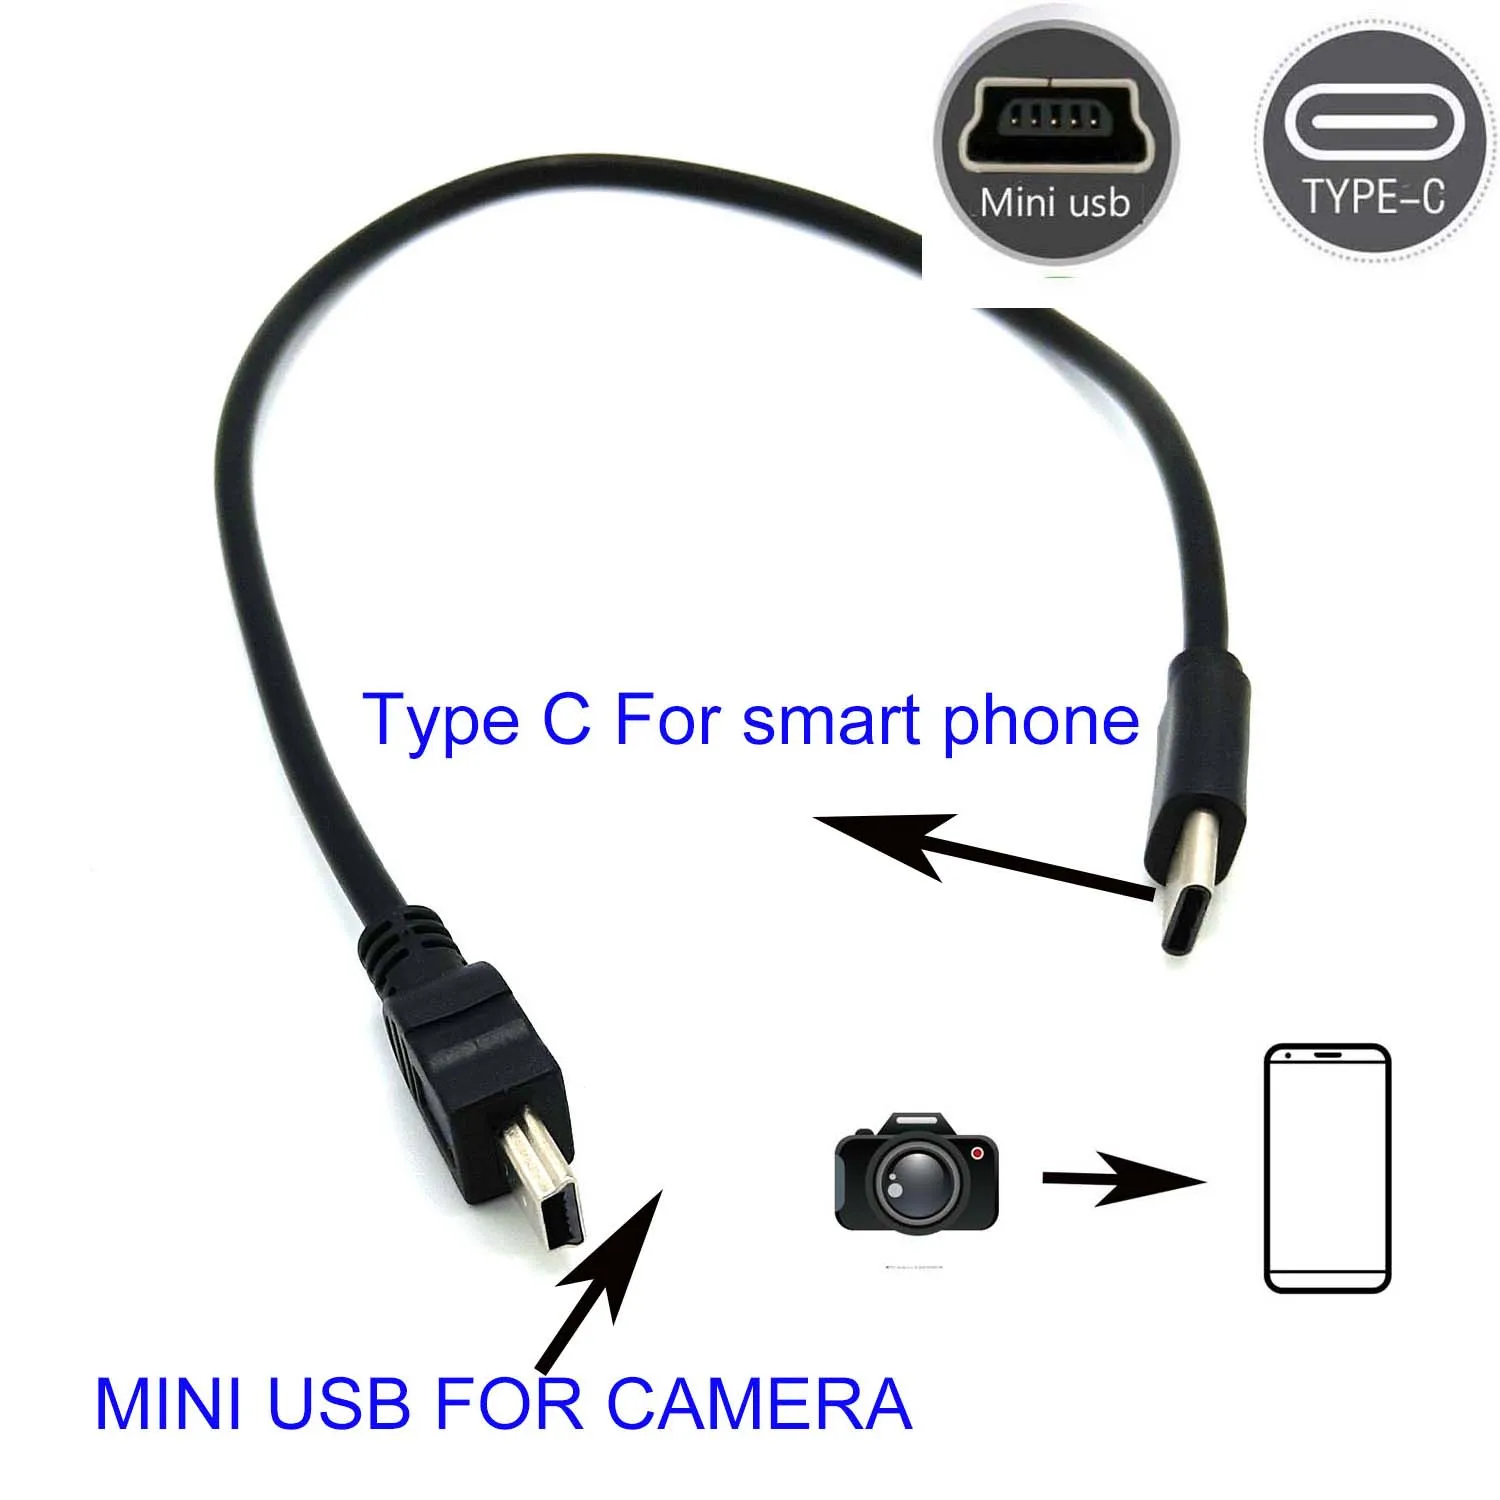 USB Cable/Cord for canon PowerShot A3100 A40 A400 A410 